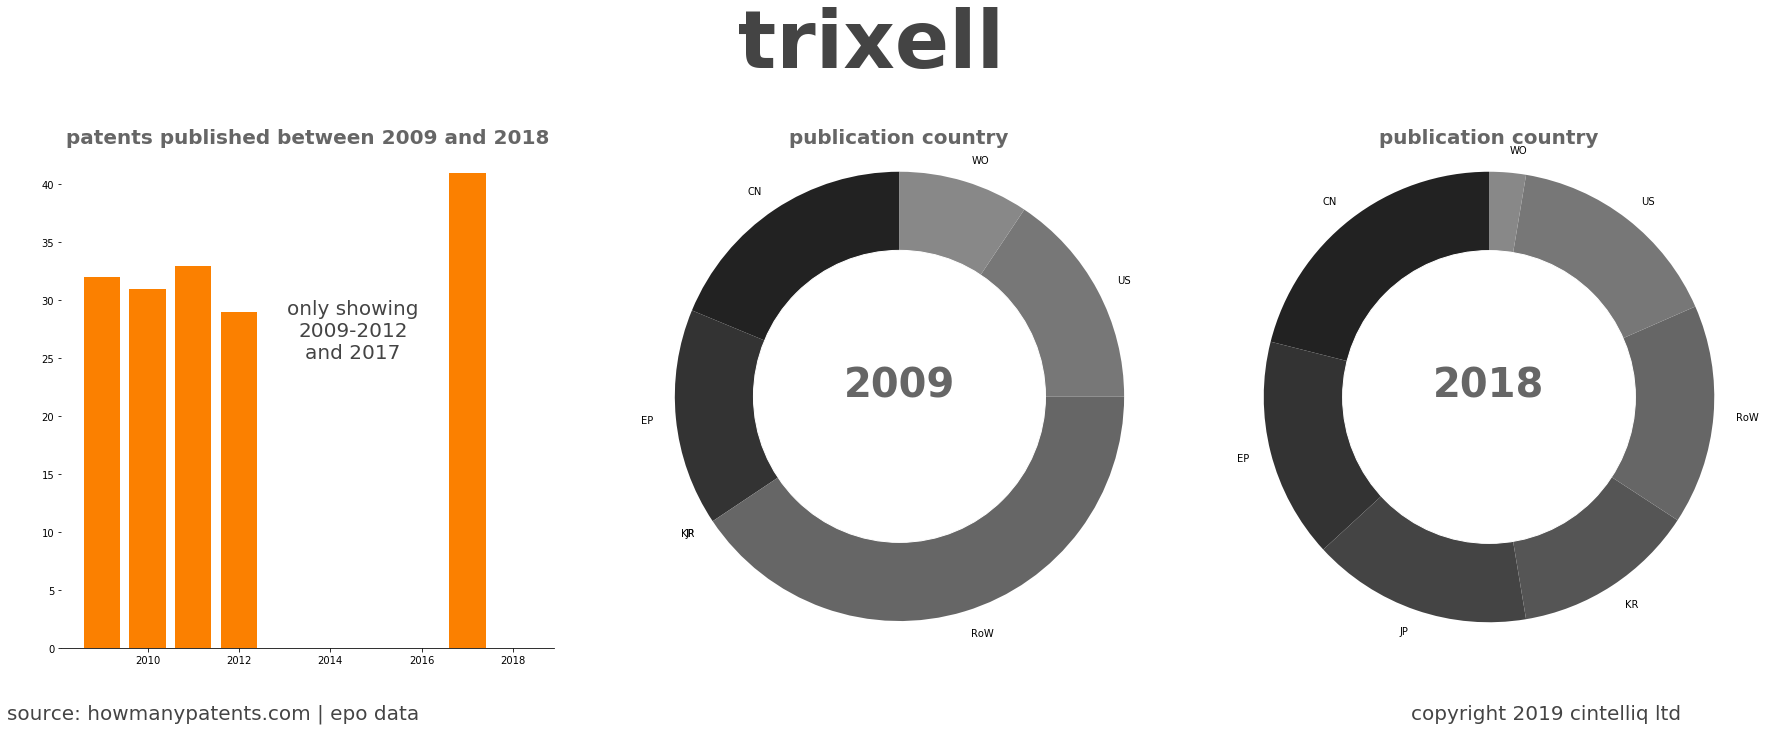 summary of patents for Trixell